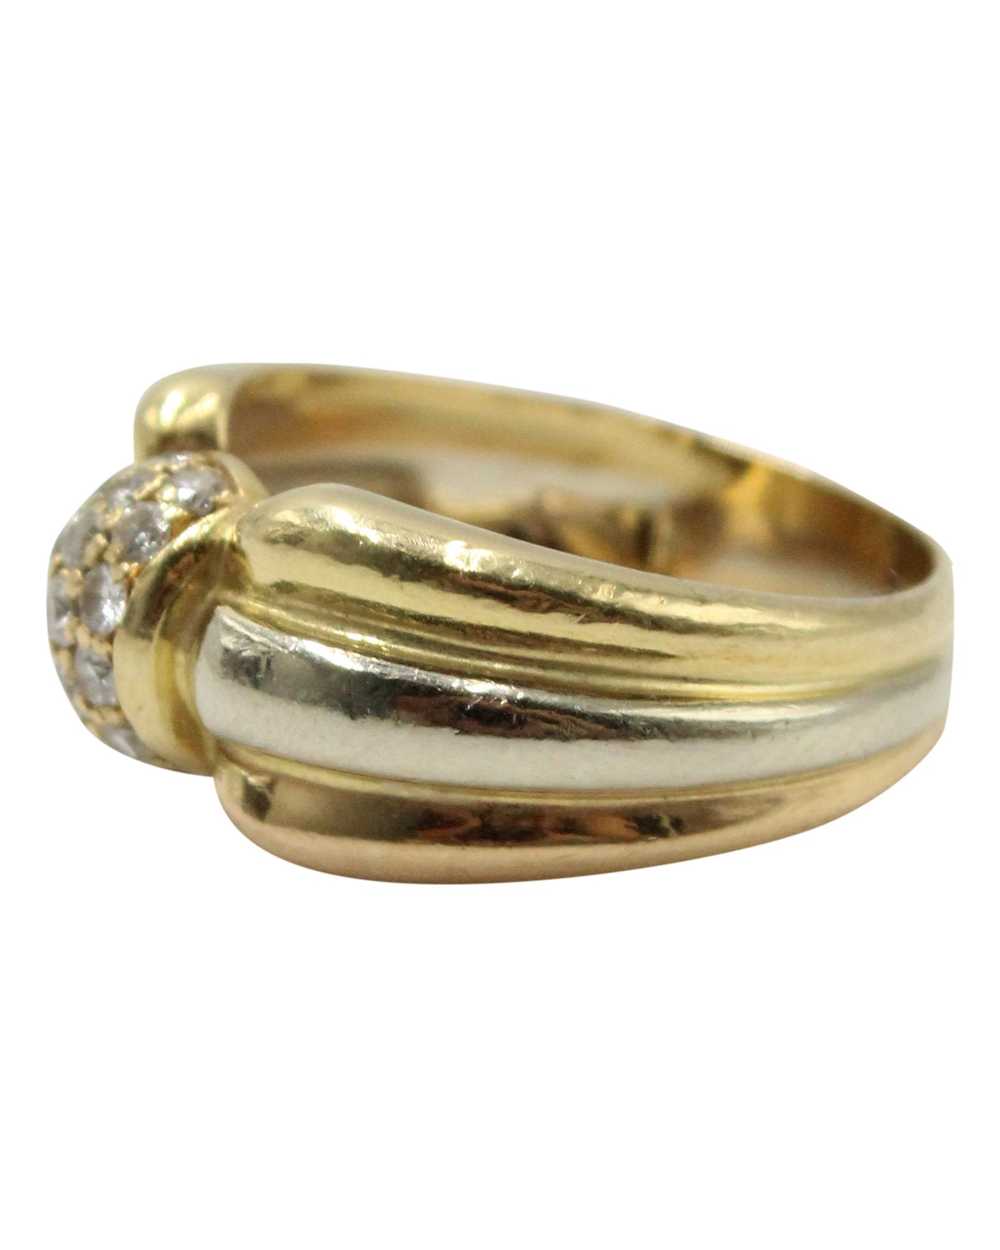 Product Details Cartier 18k Gold Diamond Ring - image 3